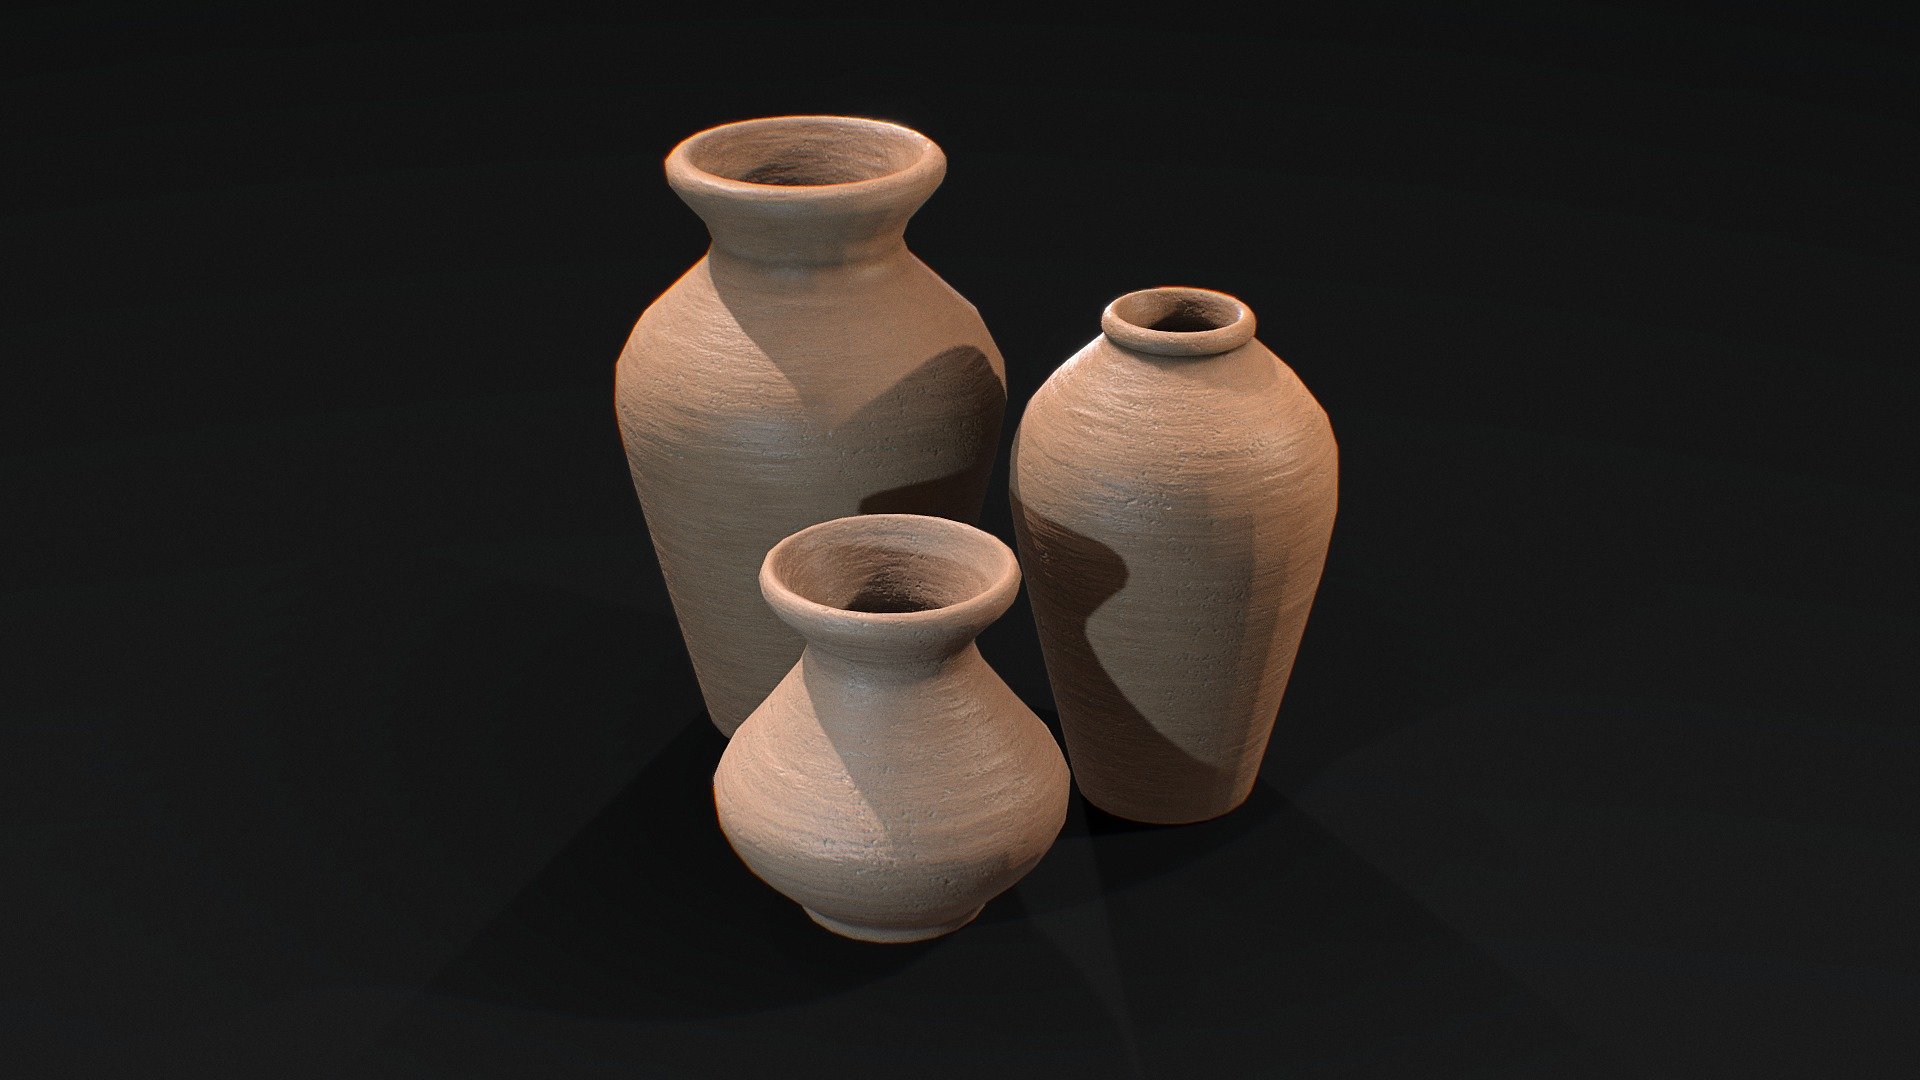 This is a 3d model of clay Pots for using as water vessel. It is can be used as assets for games and other store markets renders.

This model is created in 3ds Max and textured in Substance Painter.

This model is made in real proportions.

High quality of textures are available to download.

Maps include - Base Color, Normal, AO and Roughness Textures 3d model